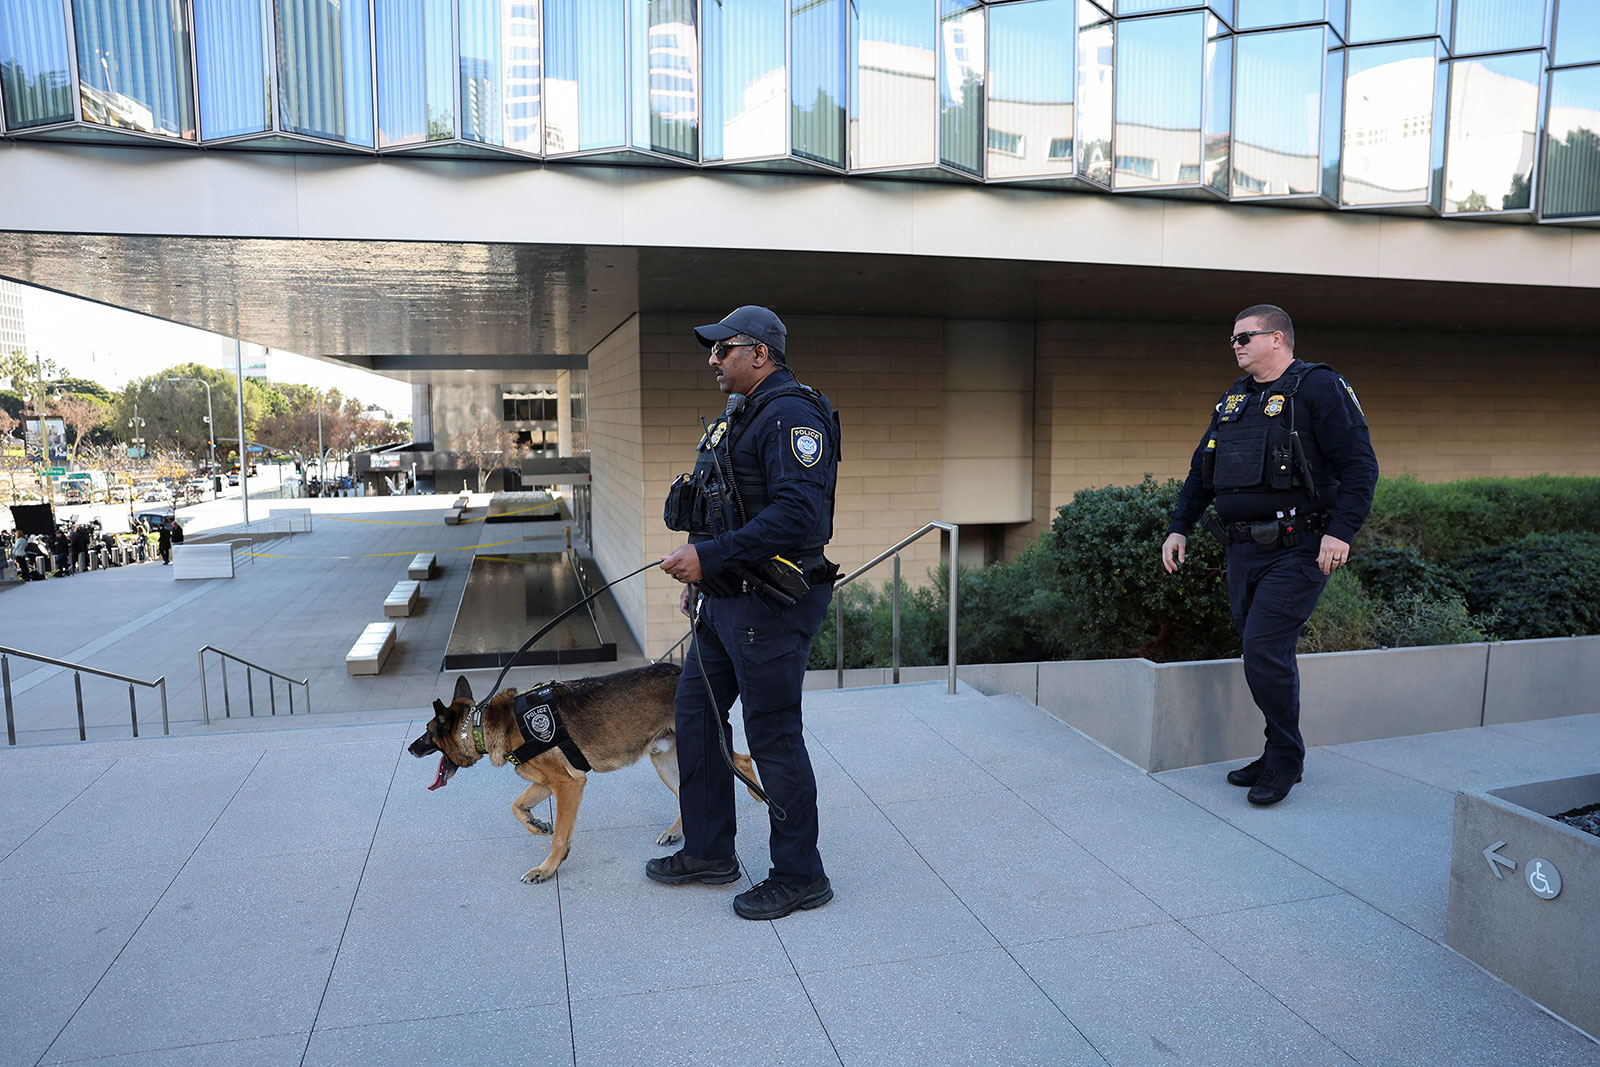 Federal police officers patrol outside a federal court where Hunter Bidenis expected to appear on tax charges, in Los Angeles, California, on Thursday, January 1.